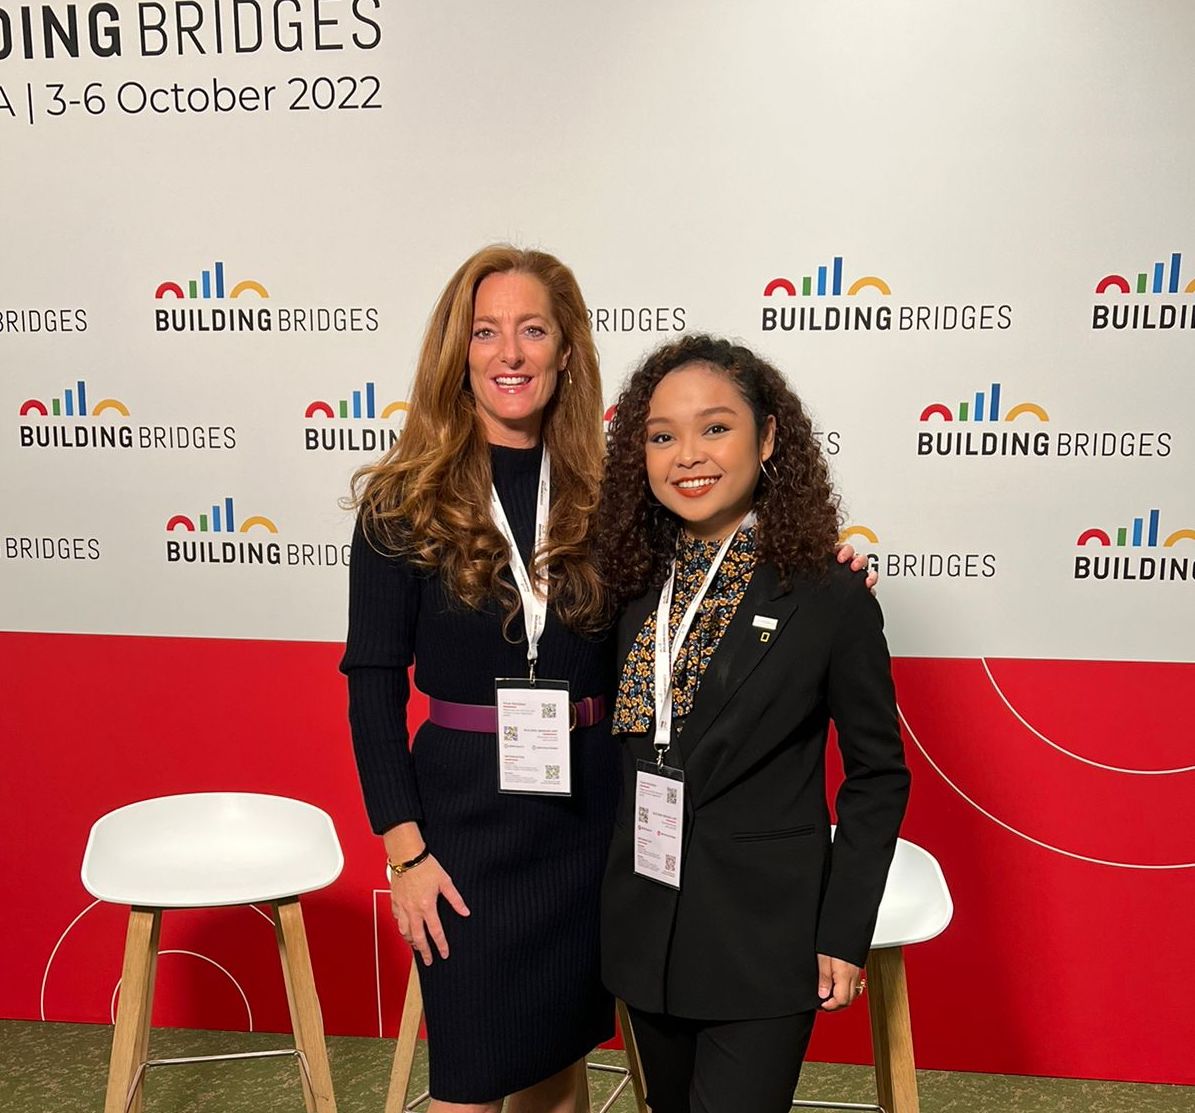 Our Change-maker @LouiseMabulo was invited to speak today at the #BuildingBridges22 Summit on the 'Agriculture, Food, Land Use' panel, along with Hubert Keller from @lombardodier, @rob_cameron_, @MariaLettini, and Johnny el Hachem, and moderated by @EvaZabey1. 

@BBridgesCH